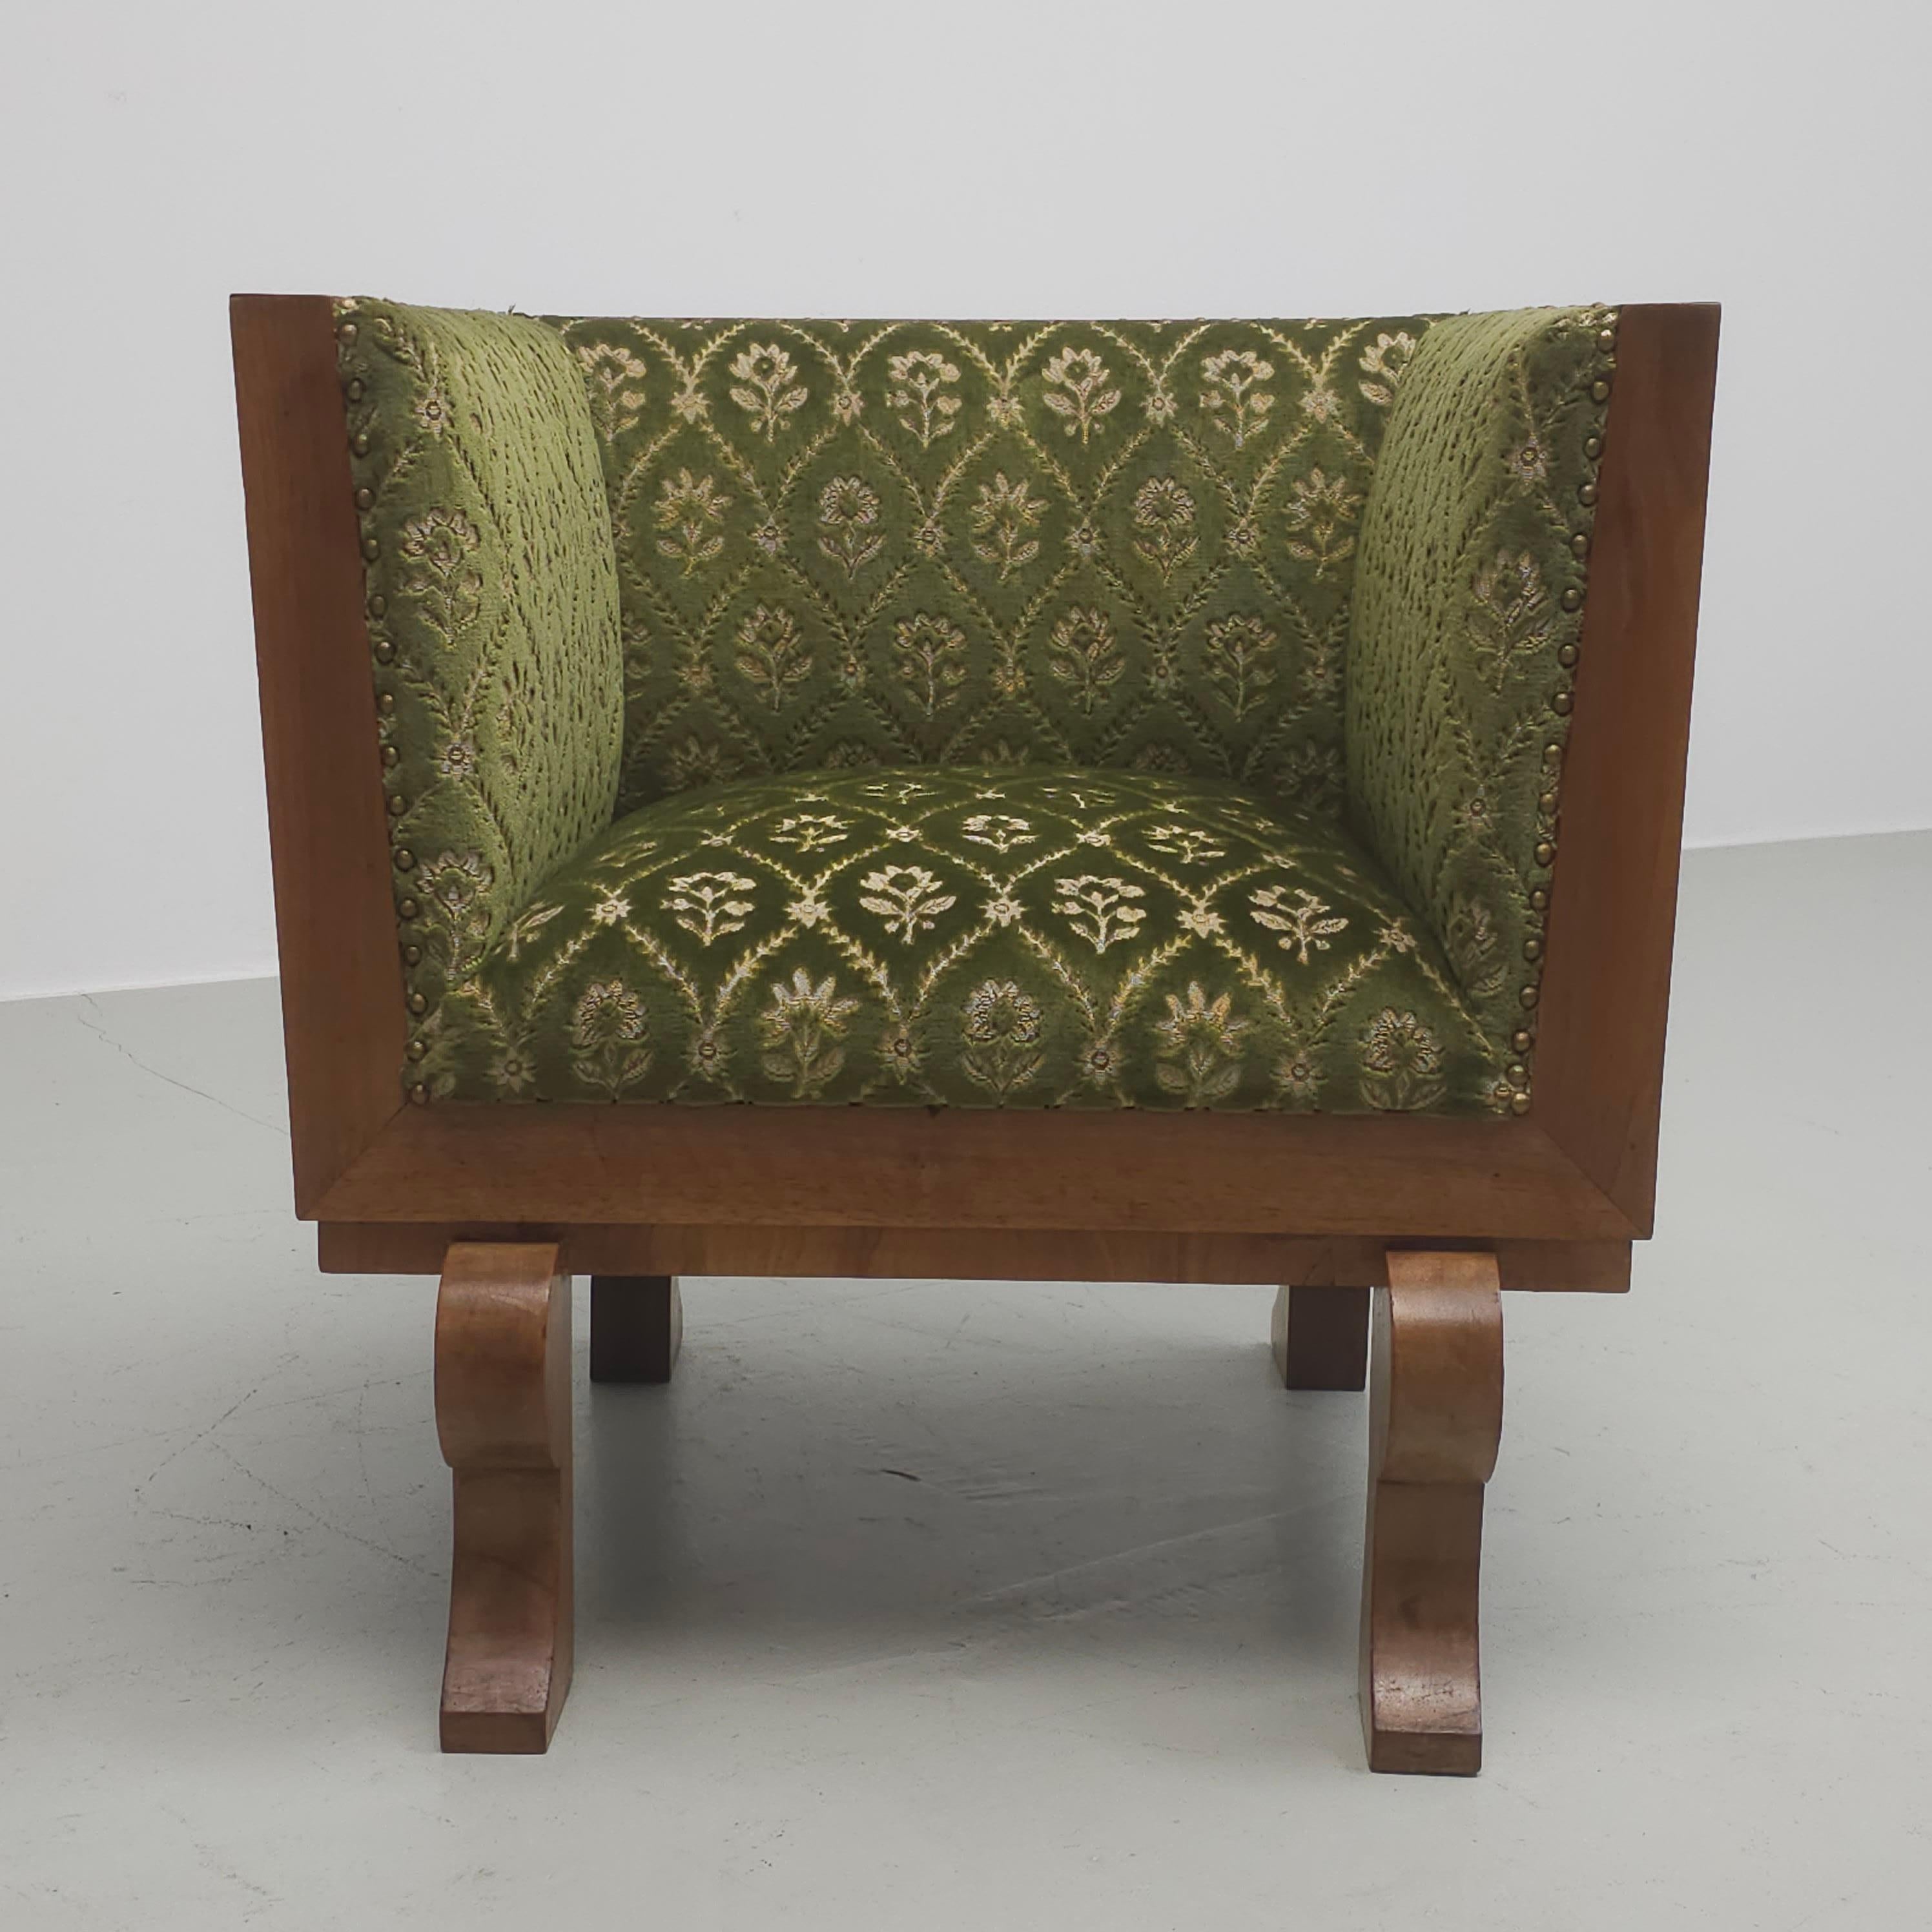 Very decorative, Art Deco style little club chair. Walnut veneer and original green velvet upholstery. Possible French or Italian design but no visible proof for that
On the bottom it's signed with number 34.

The back of the chair is wider then the